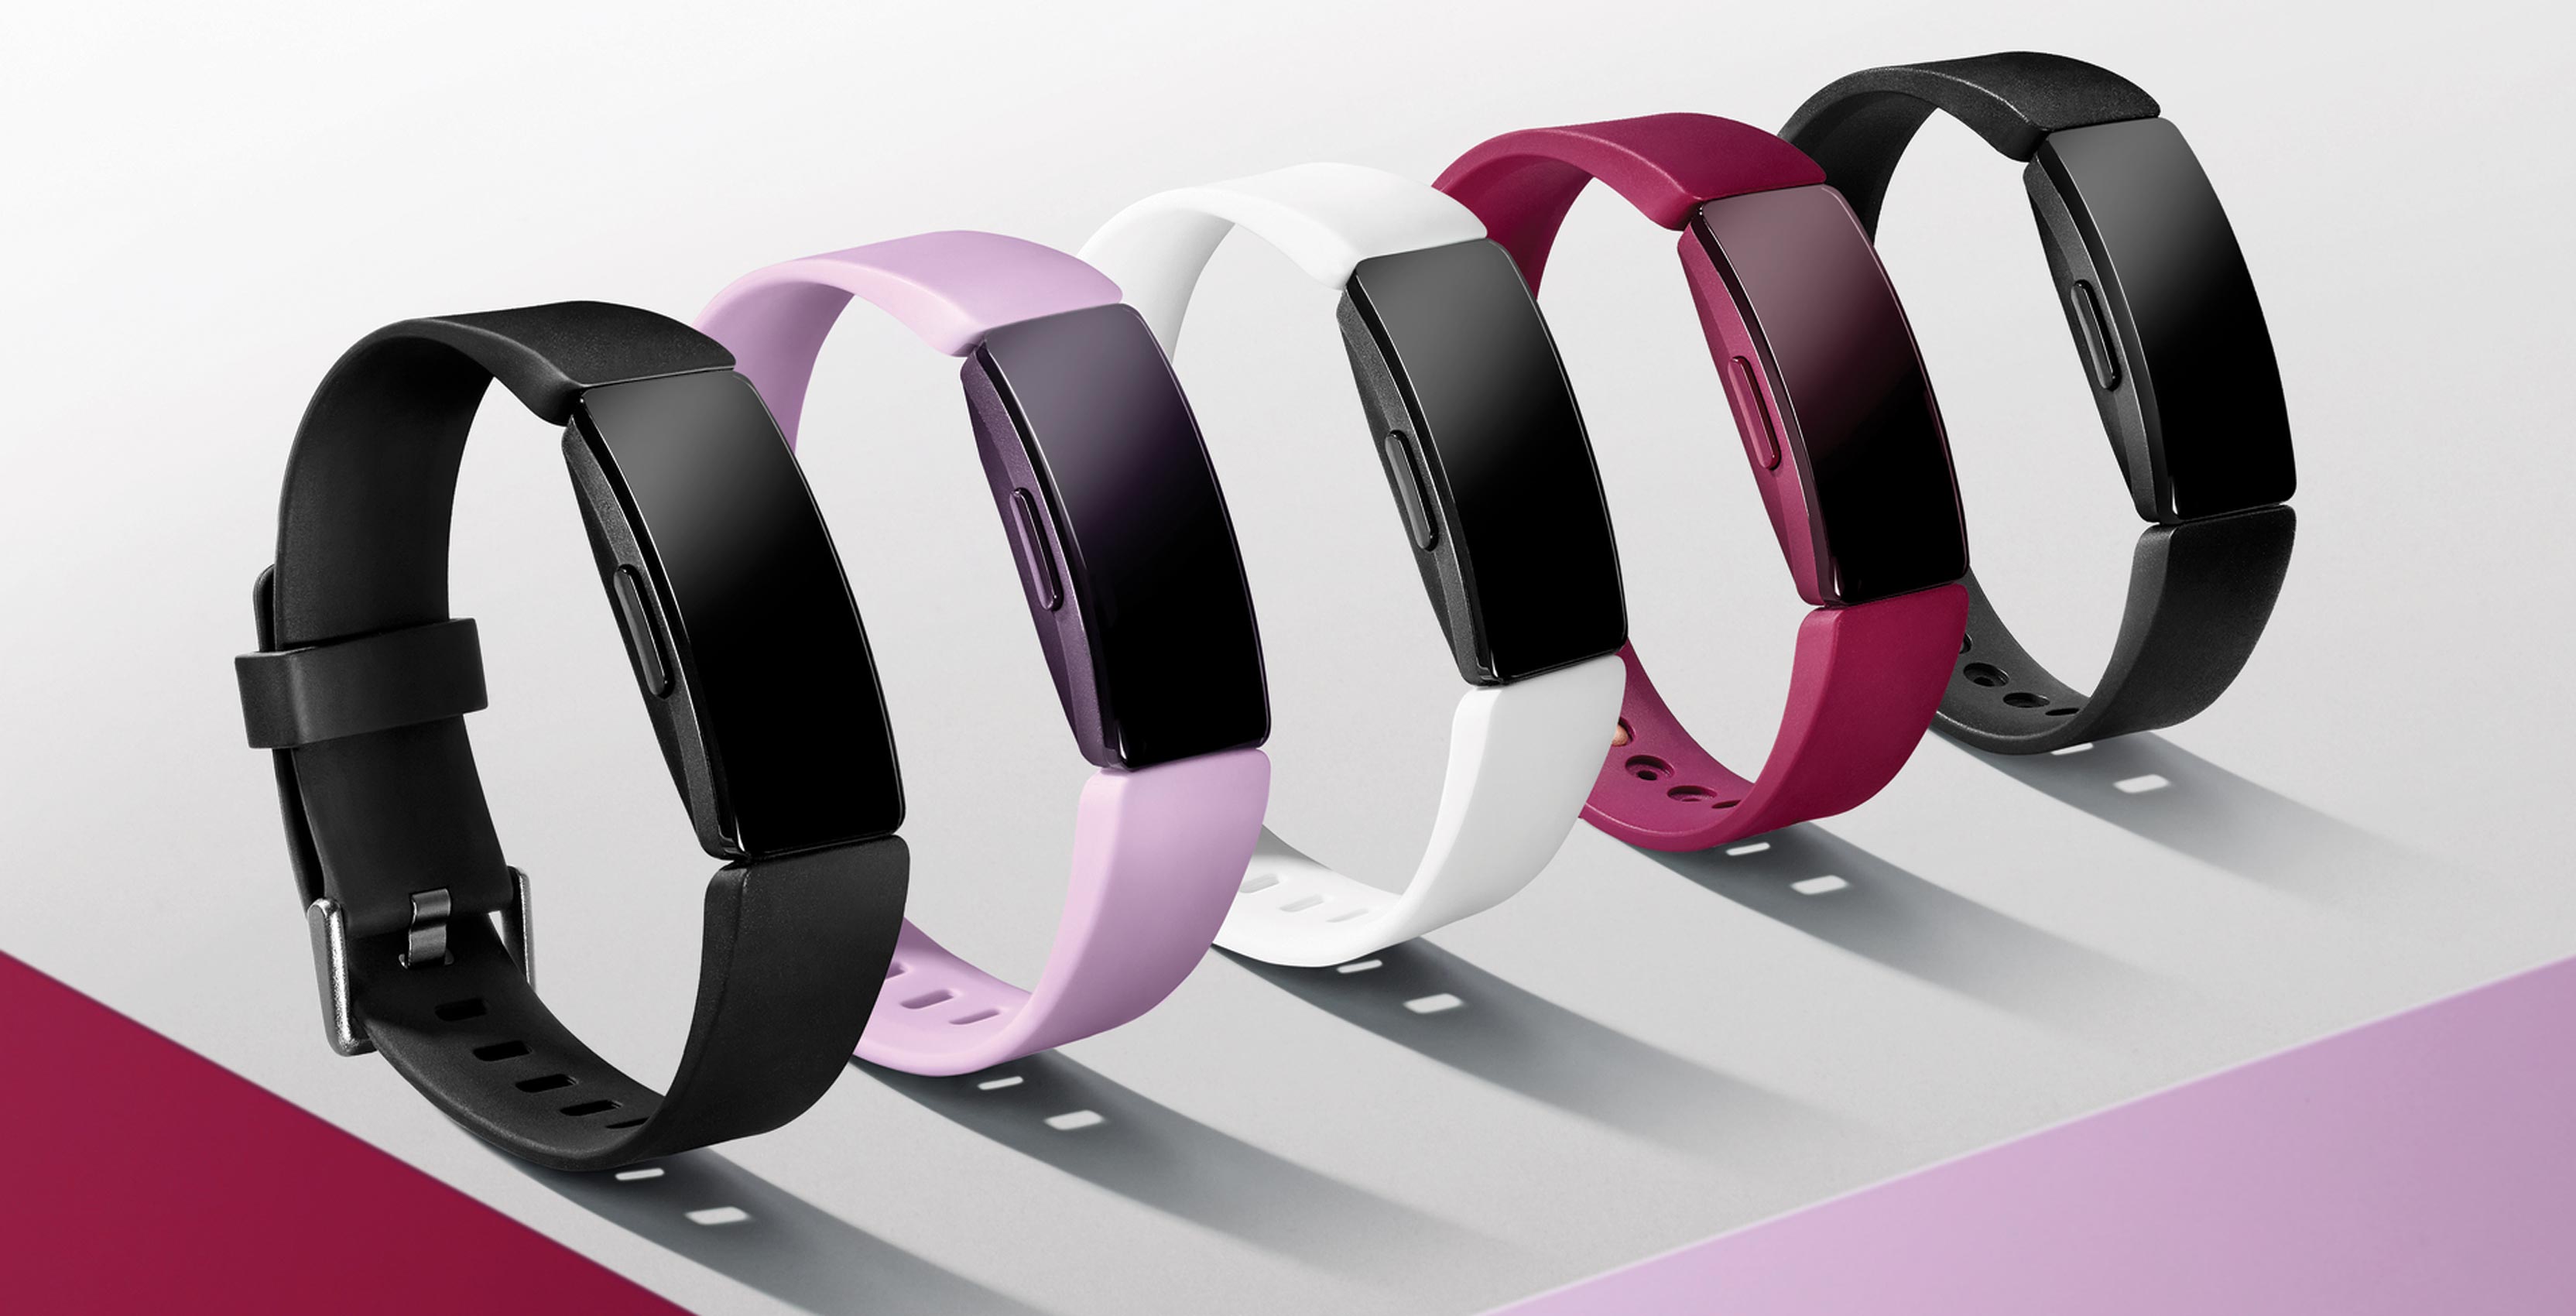 Fitbit's new Inspire lineup of affordable trackers